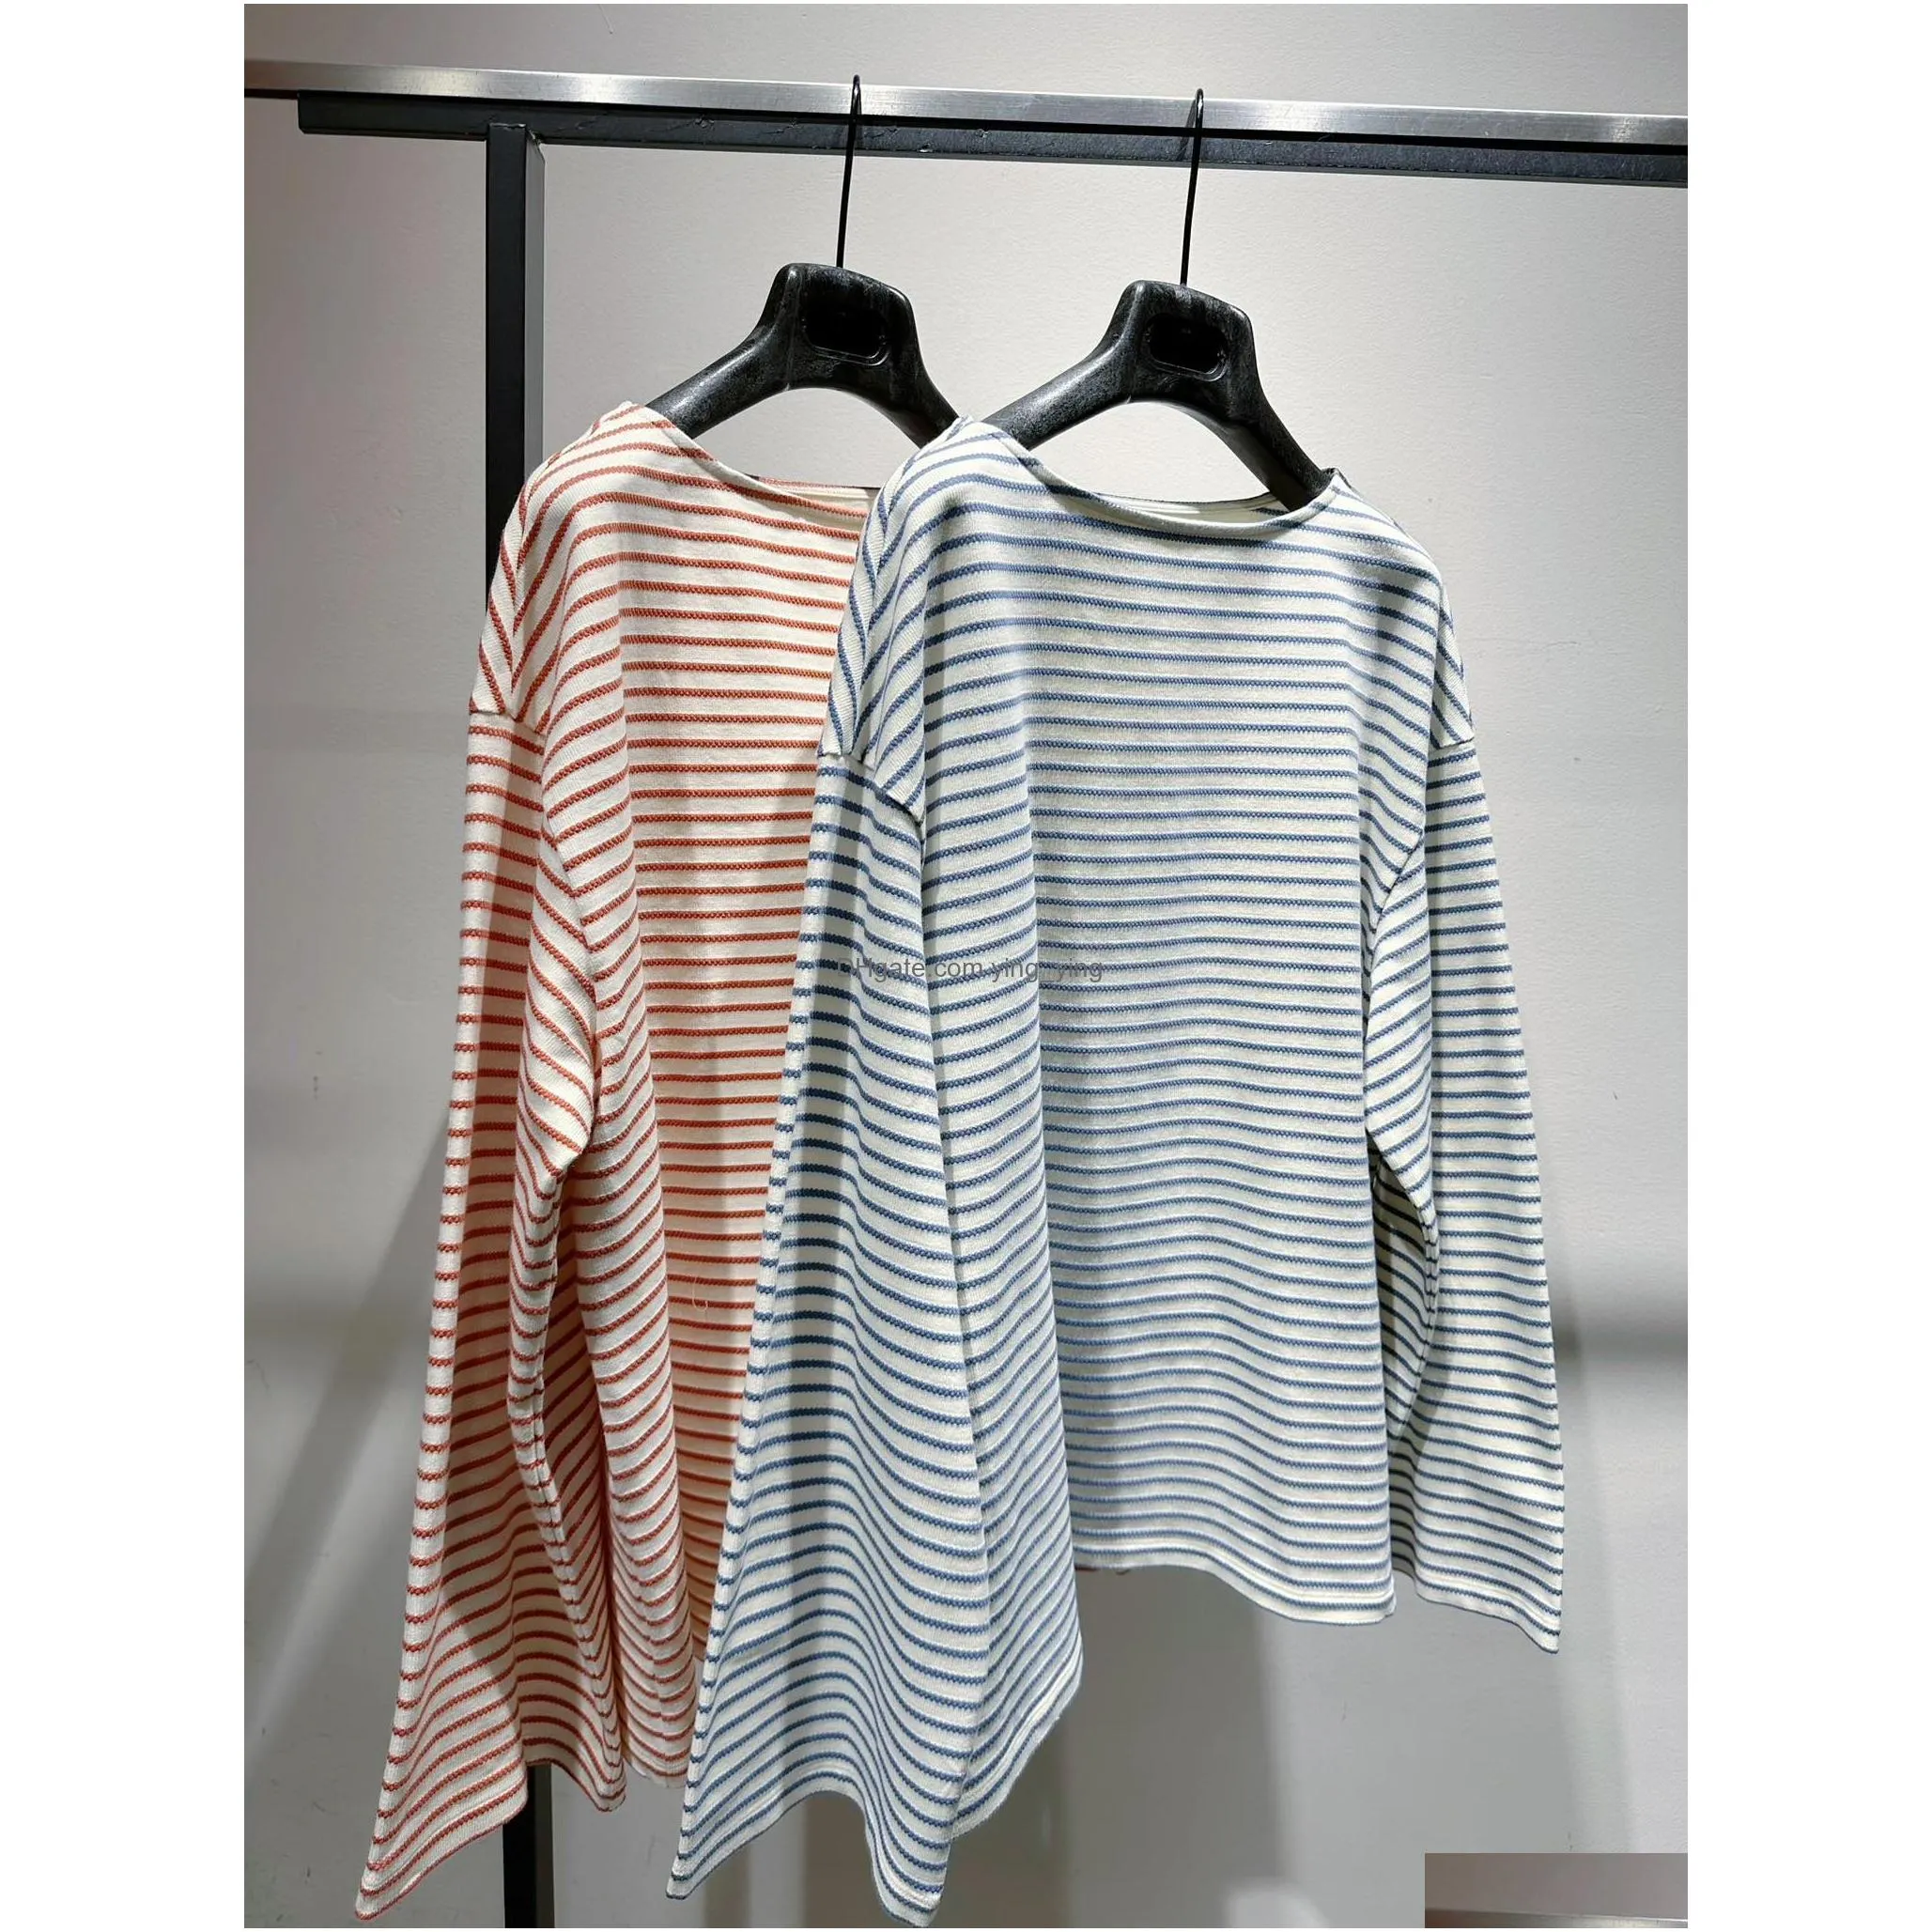 early autumn relaxation stripe top